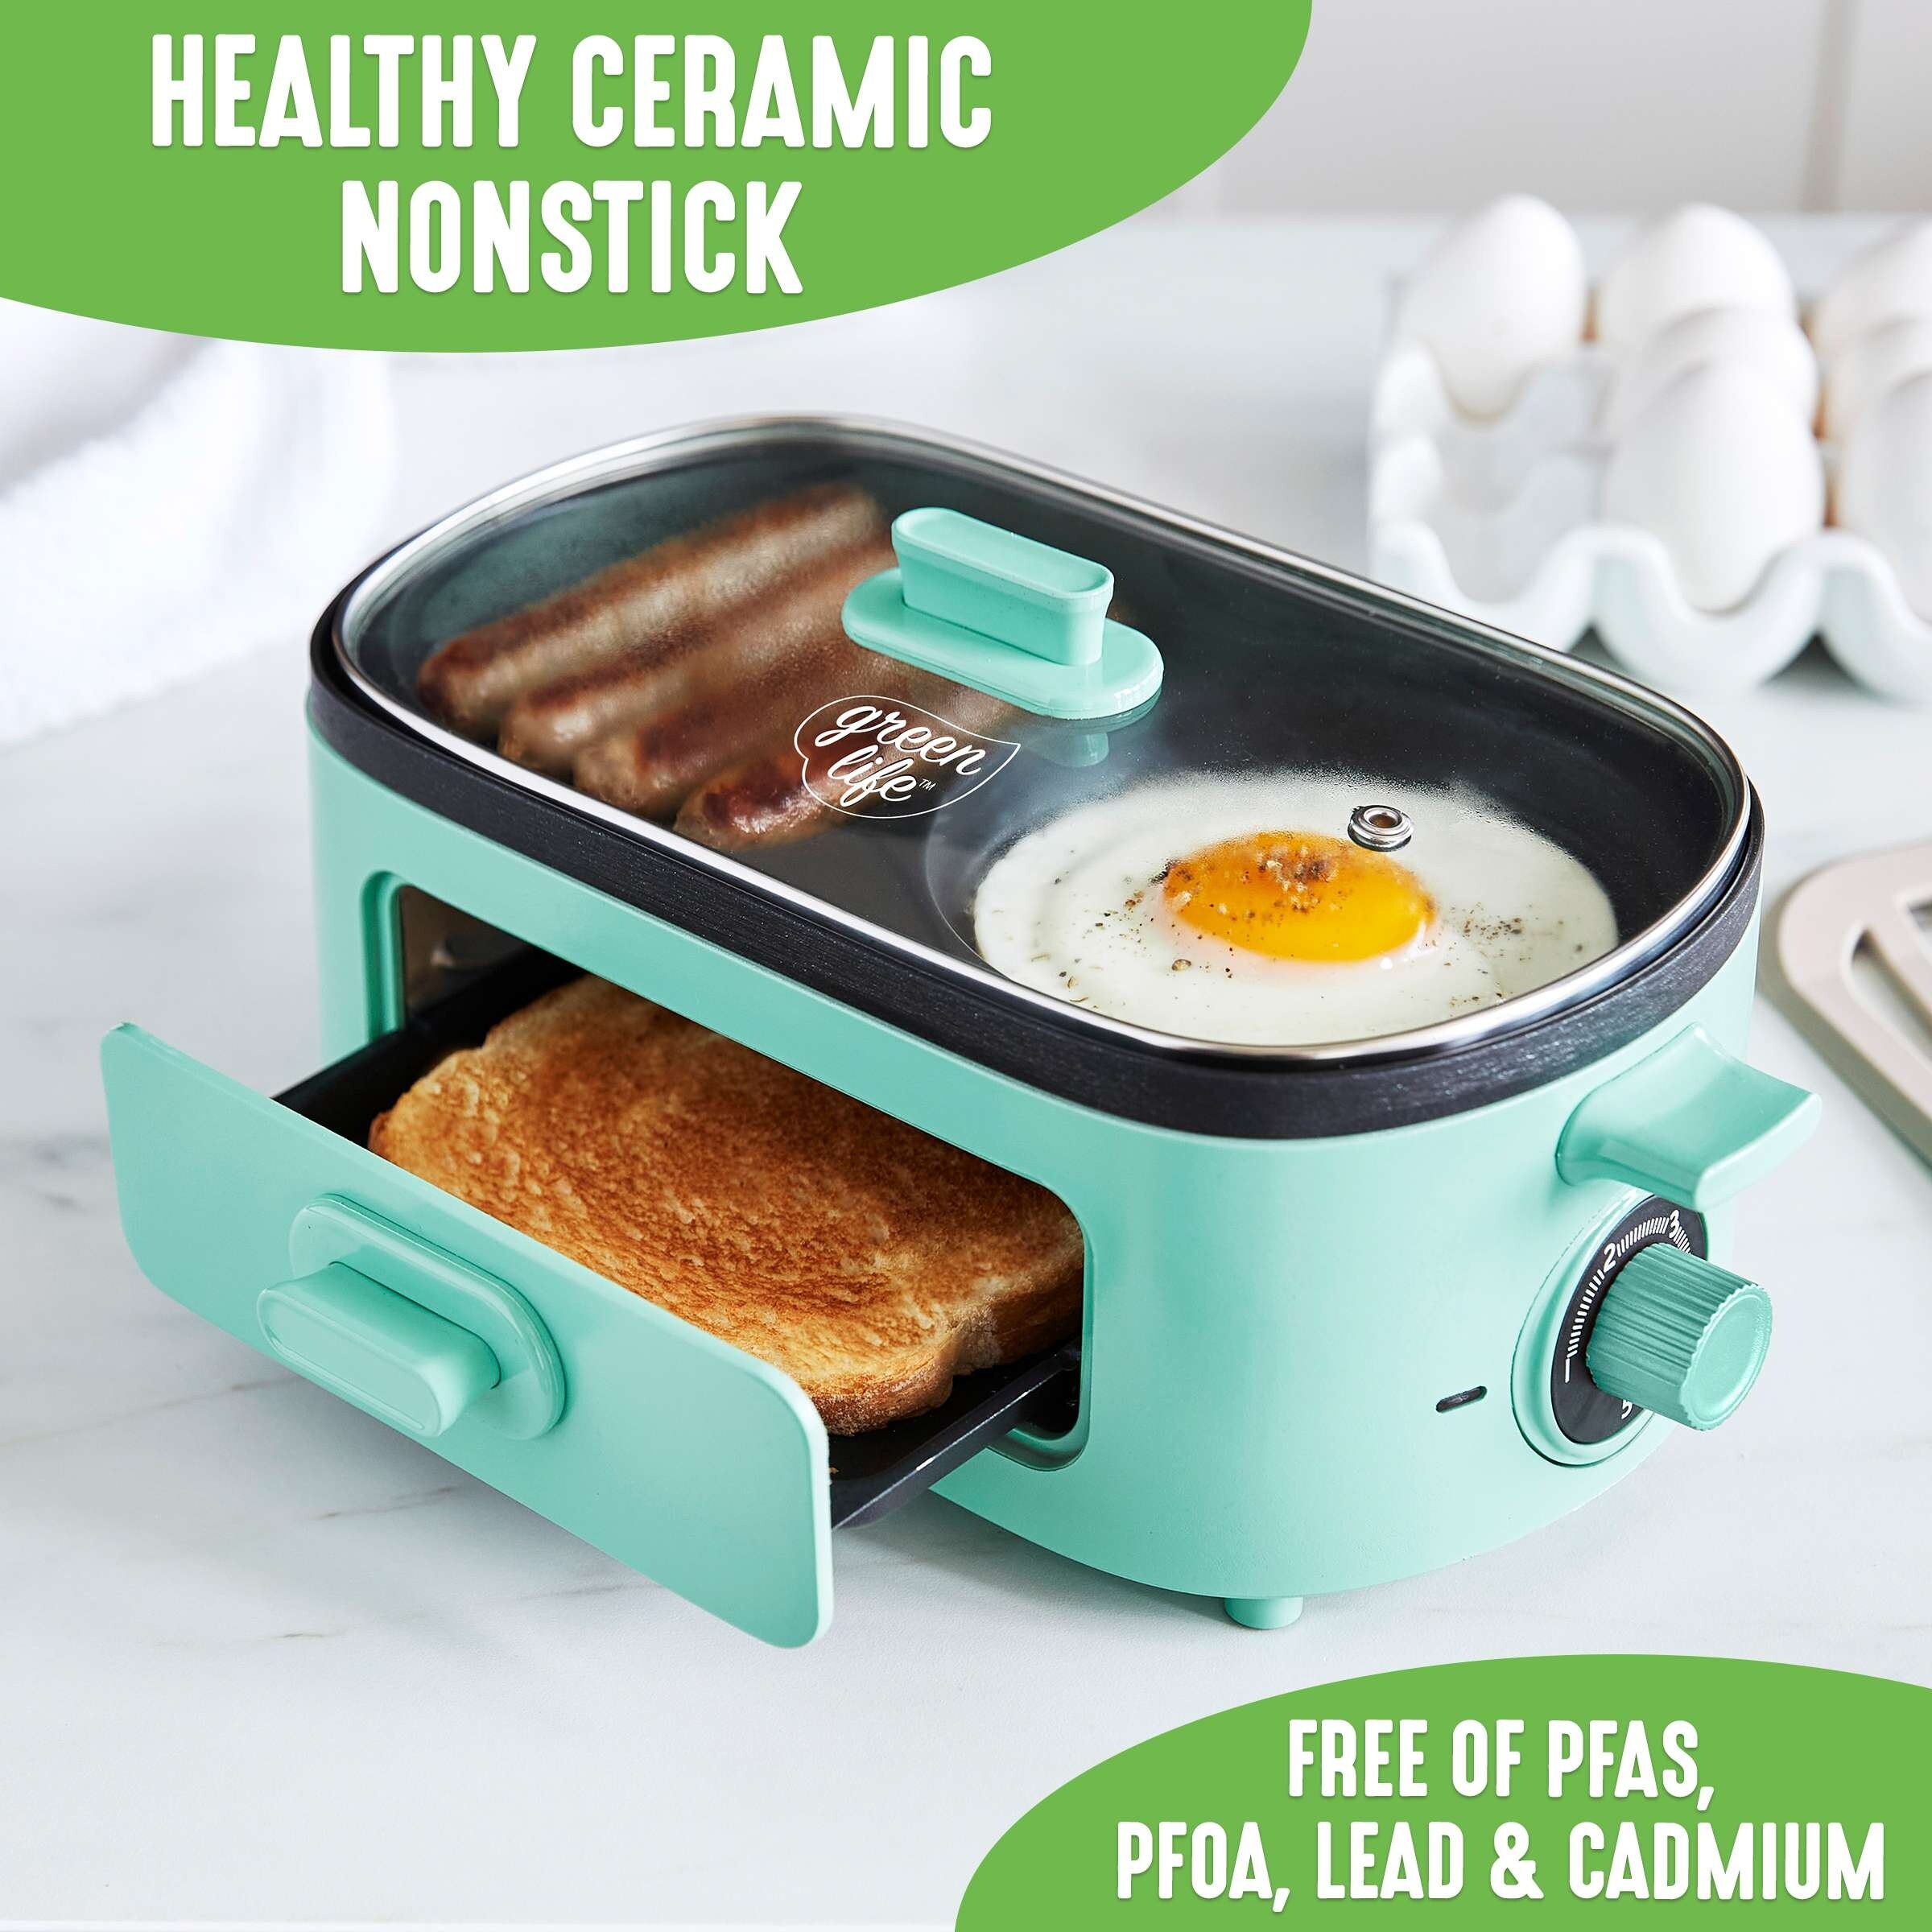 https://ak1.ostkcdn.com/images/products/is/images/direct/fc6343832e682e23322c2c6c8aa3c8fe6a04fd64/GreenLife-Breakfast-Maker.jpg